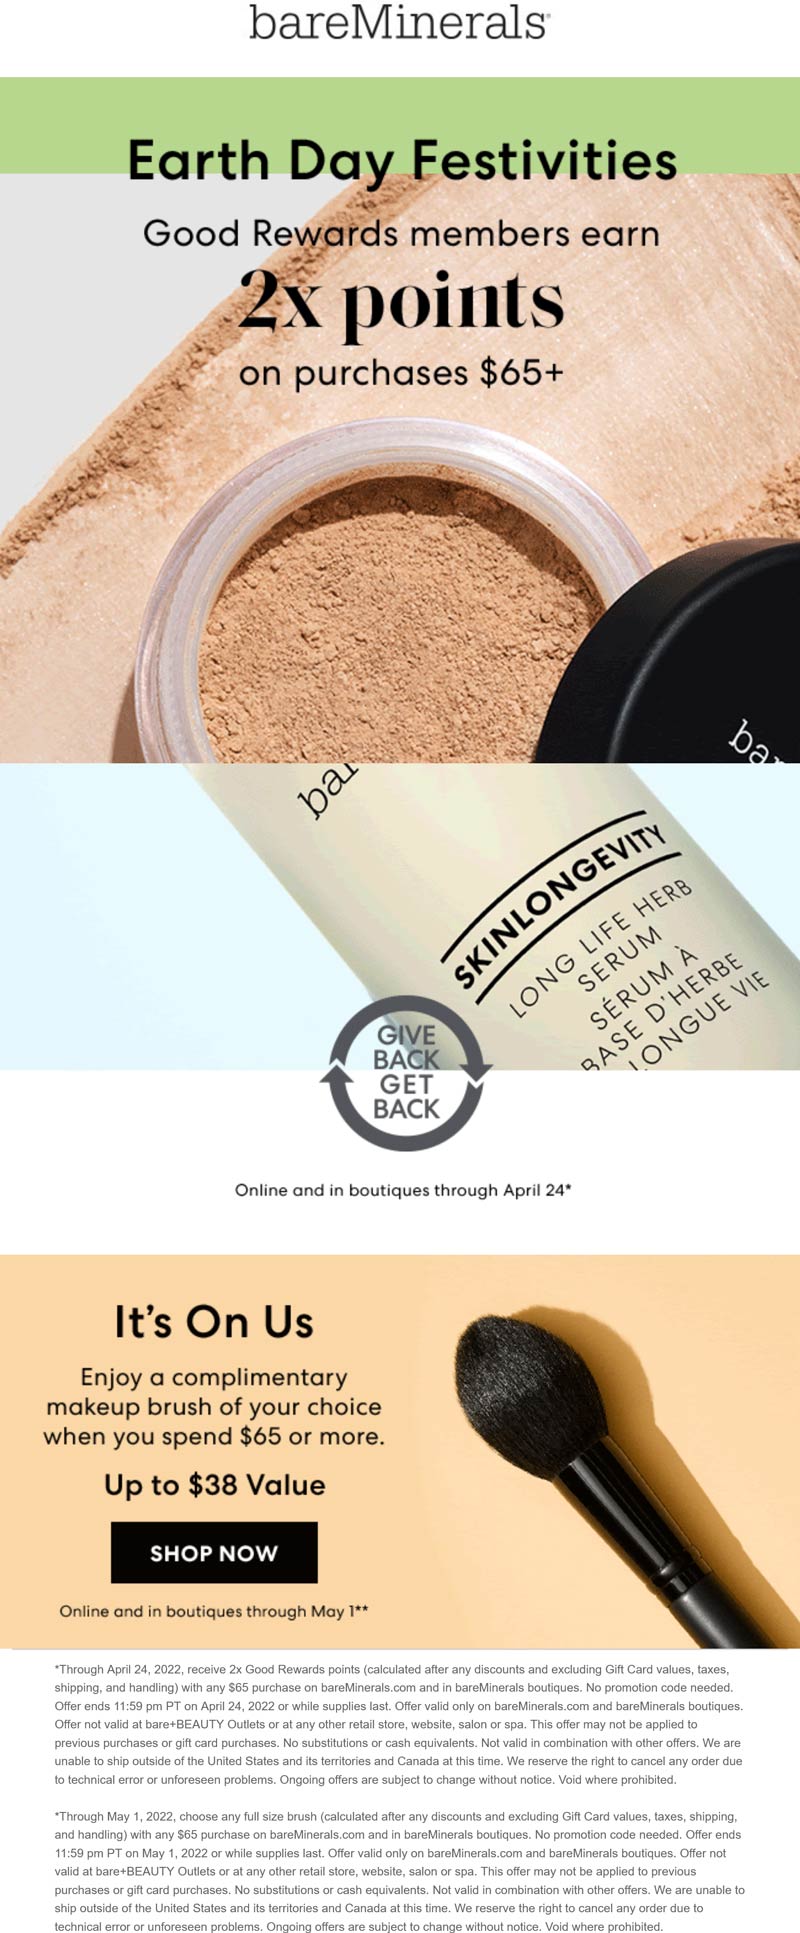 bareMinerals stores Coupon  Any full size brush free on $65 at bareMinerals, ditto online #bareminerals 